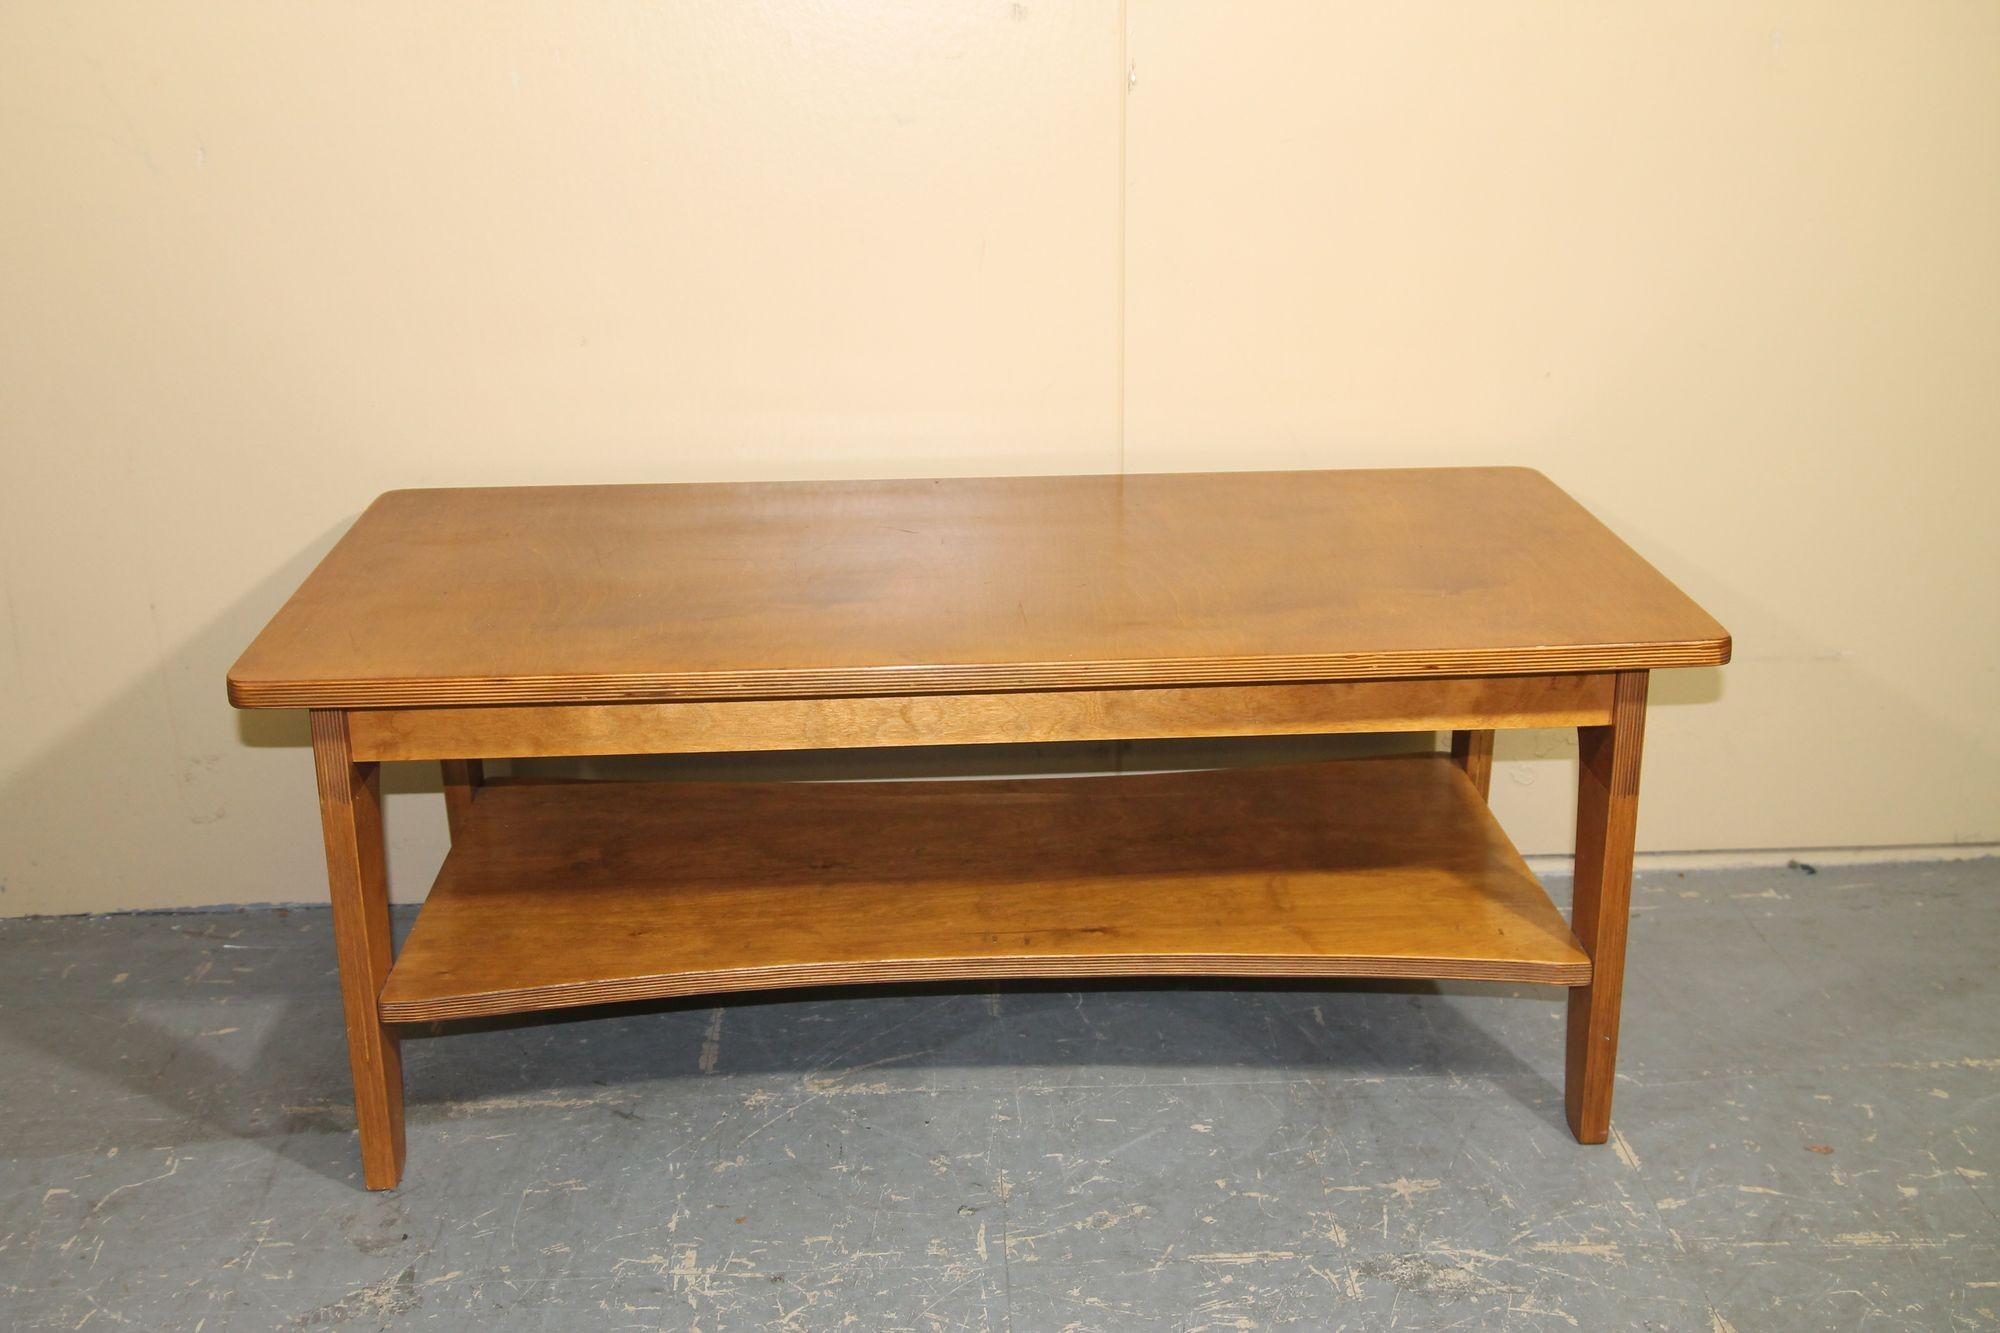 1960's Russian made plywood coffee table. Rarely do you see this example for sale. It was originally made to be broken down so it should ship easily. The table is marked 